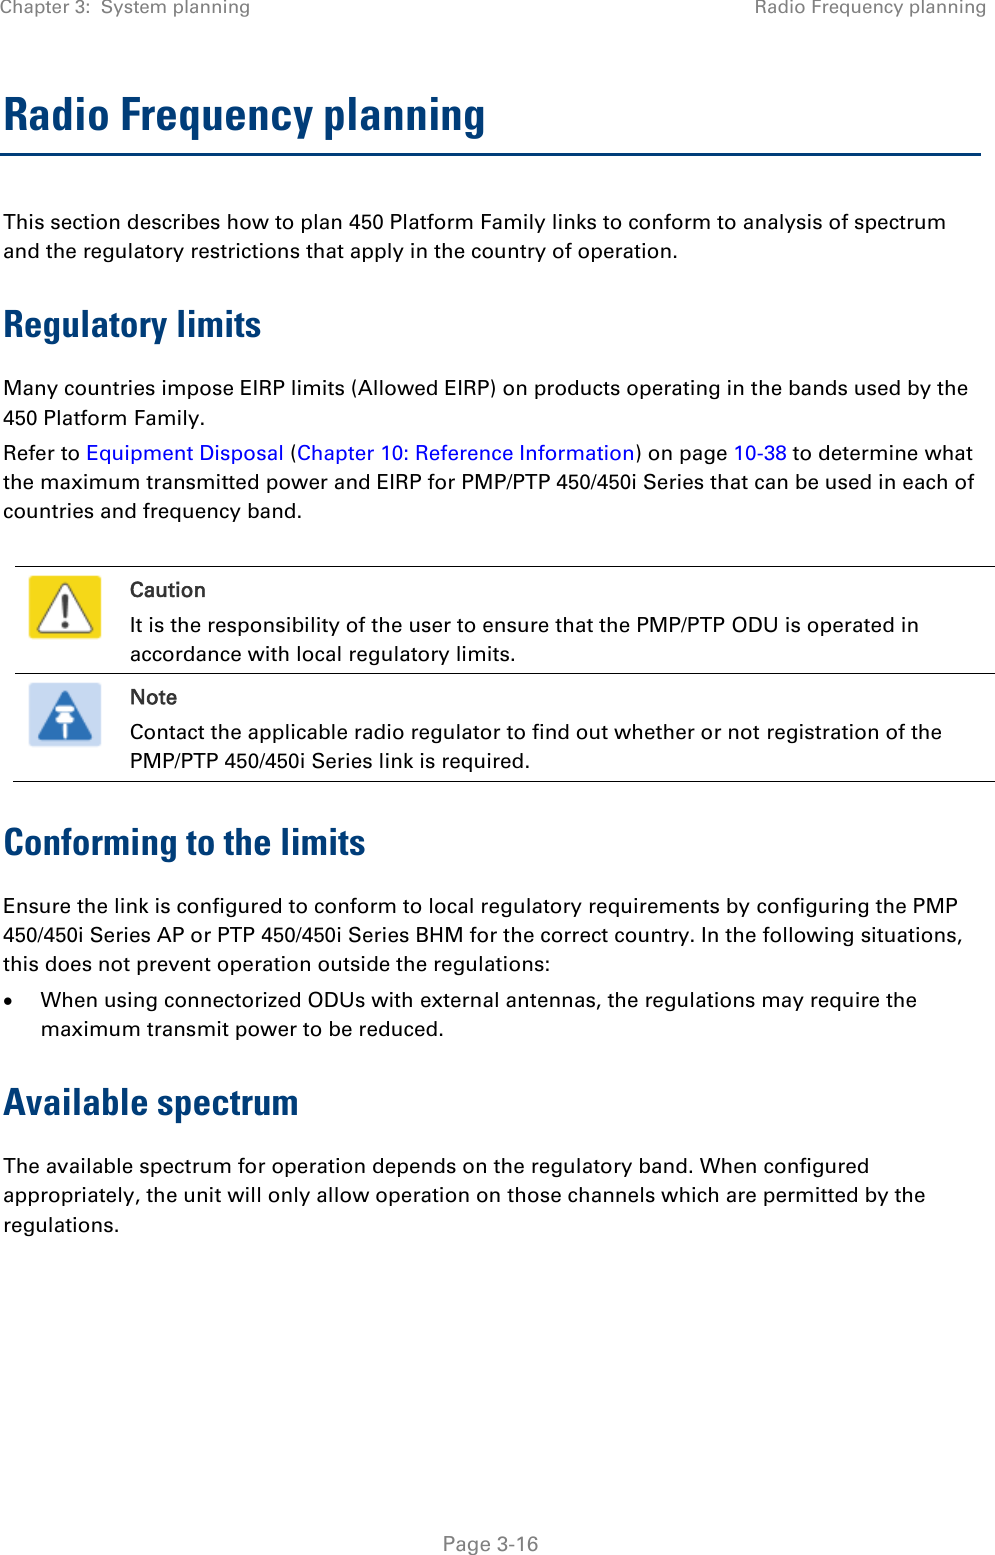 Chapter 3:  System planning Radio Frequency planning   Page 3-16 Radio Frequency planning This section describes how to plan 450 Platform Family links to conform to analysis of spectrum and the regulatory restrictions that apply in the country of operation. Regulatory limits Many countries impose EIRP limits (Allowed EIRP) on products operating in the bands used by the 450 Platform Family.  Refer to Equipment Disposal (Chapter 10: Reference Information) on page 10-38 to determine what the maximum transmitted power and EIRP for PMP/PTP 450/450i Series that can be used in each of countries and frequency band.   Caution It is the responsibility of the user to ensure that the PMP/PTP ODU is operated in accordance with local regulatory limits.  Note Contact the applicable radio regulator to find out whether or not registration of the PMP/PTP 450/450i Series link is required. Conforming to the limits Ensure the link is configured to conform to local regulatory requirements by configuring the PMP 450/450i Series AP or PTP 450/450i Series BHM for the correct country. In the following situations, this does not prevent operation outside the regulations:  When using connectorized ODUs with external antennas, the regulations may require the maximum transmit power to be reduced. Available spectrum The available spectrum for operation depends on the regulatory band. When configured appropriately, the unit will only allow operation on those channels which are permitted by the regulations.     